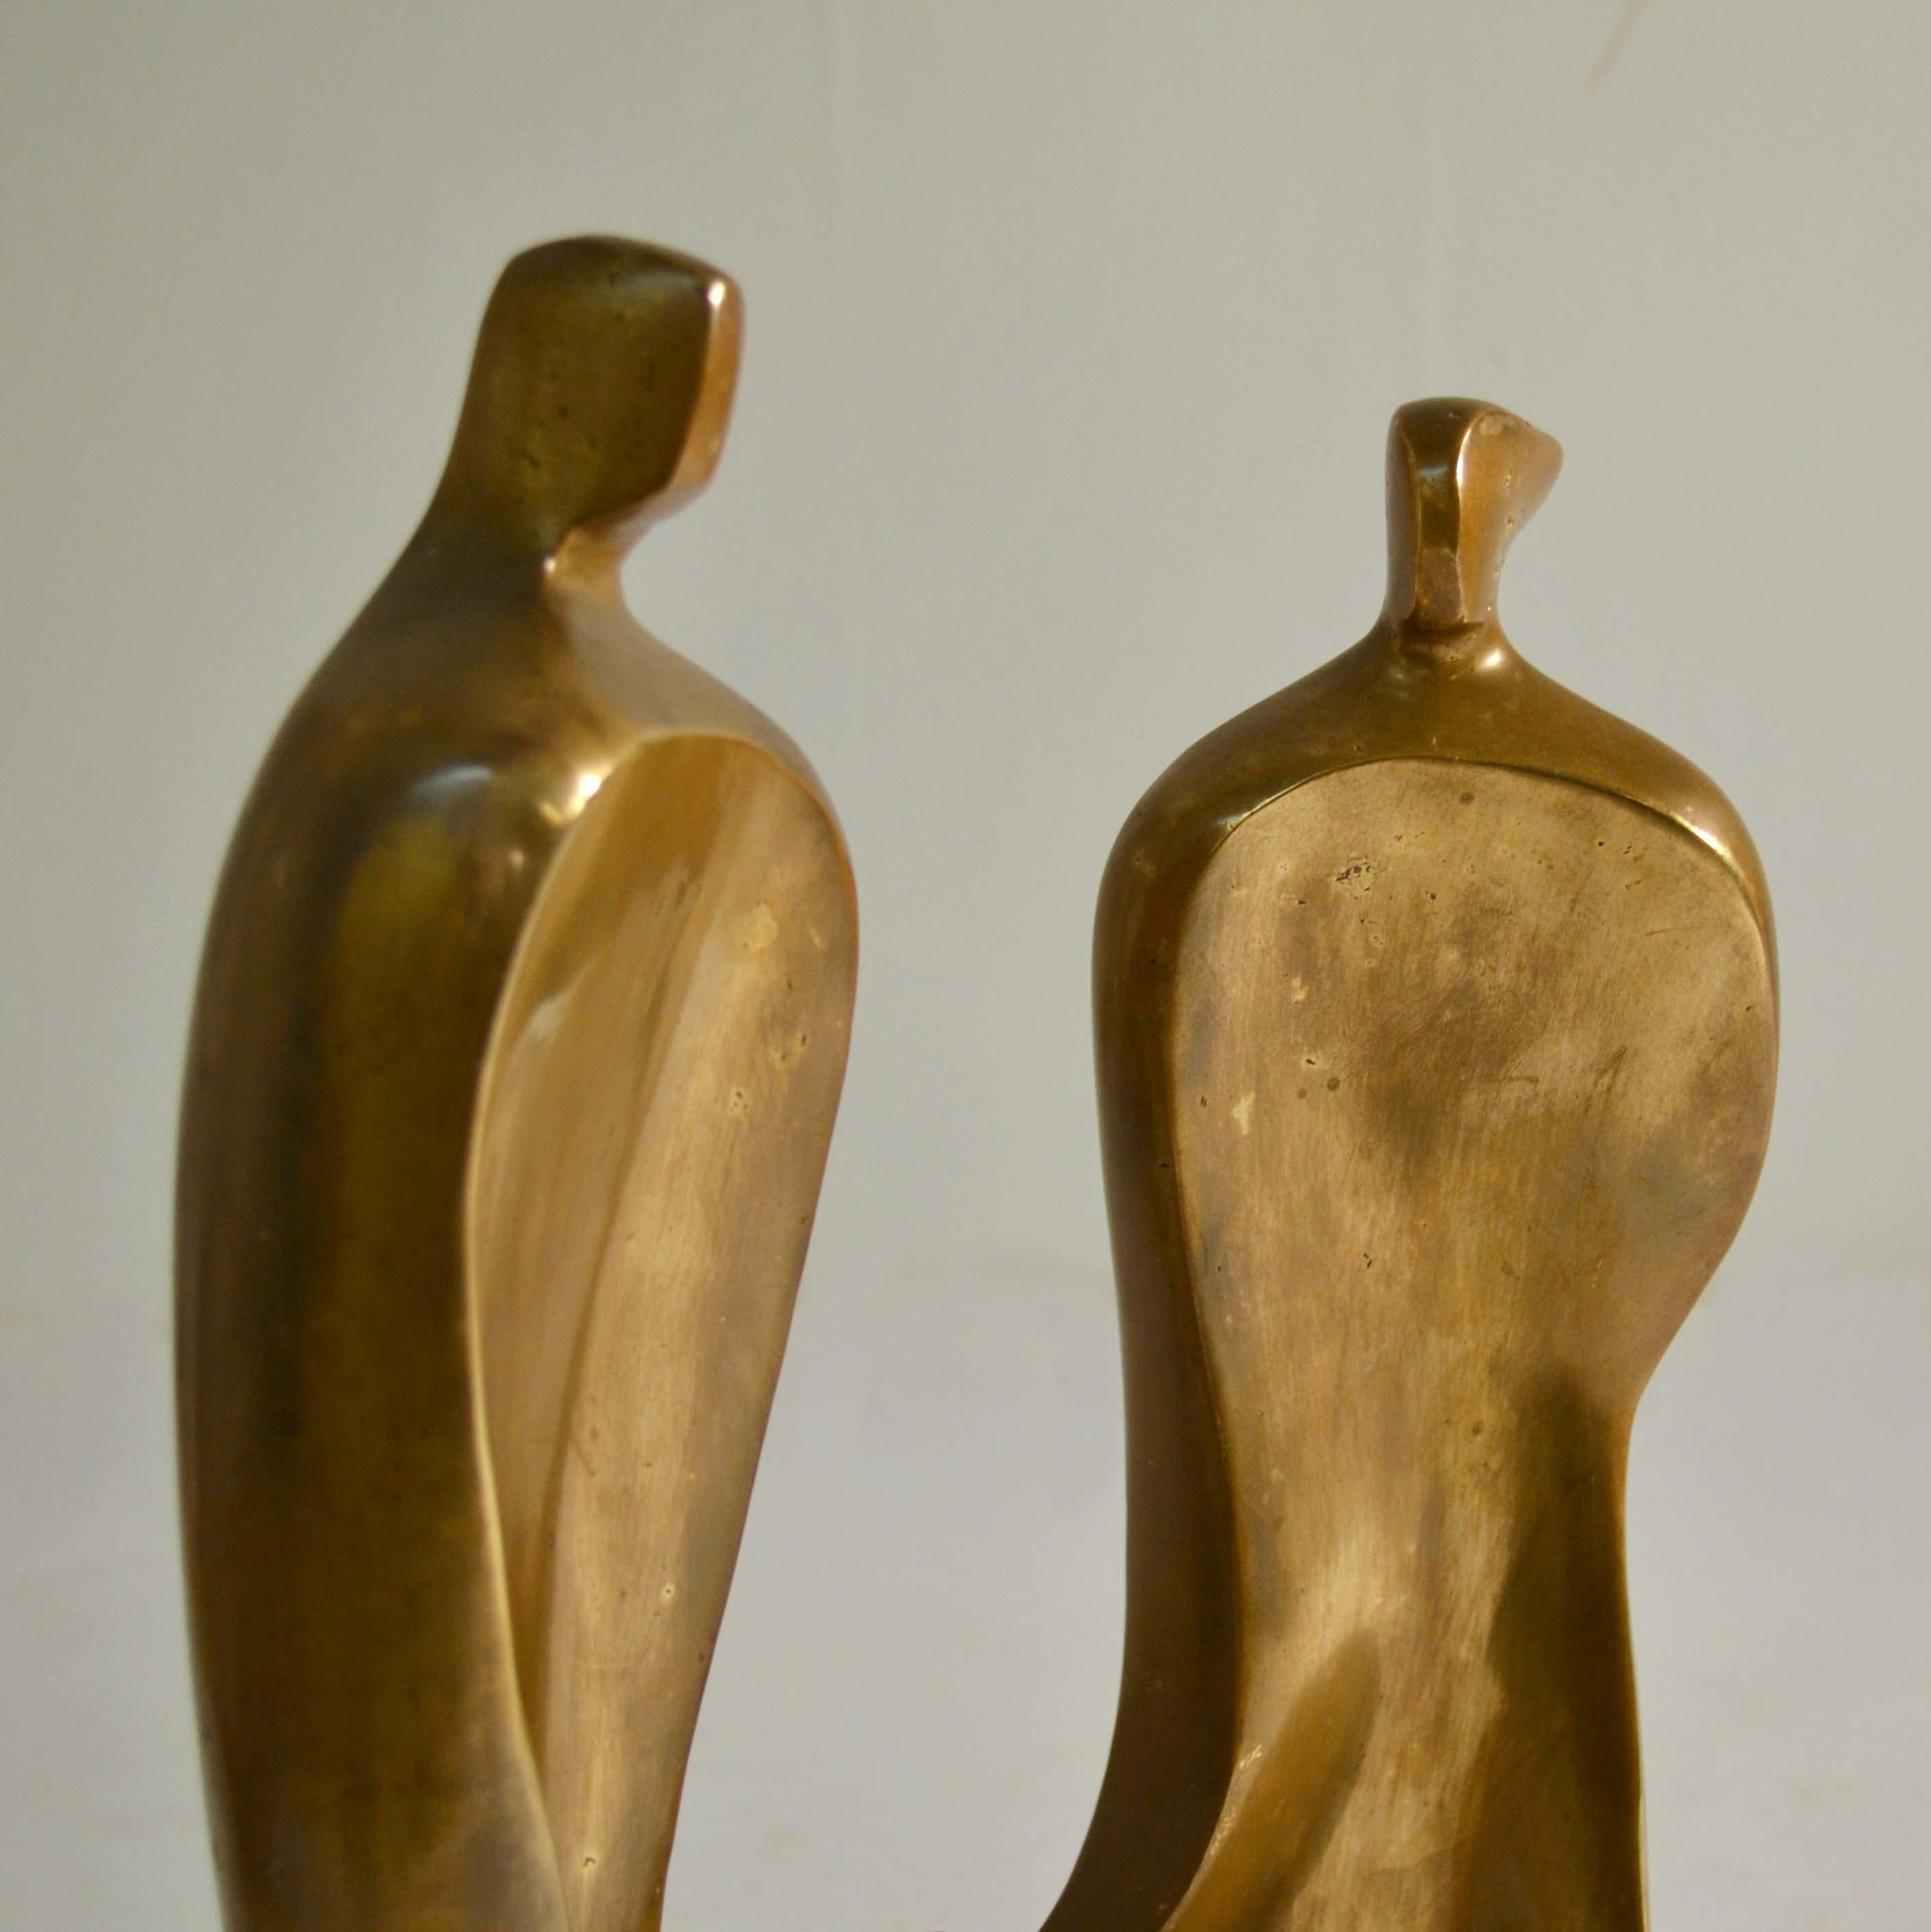 Large figurative bronze sculpture of family expresses intimacy by the curved placing of the figures by Maria Guernova (signed), 1985. The curvaceous grouping also created stability and enables the sculpture it to stand on its own. The figures are